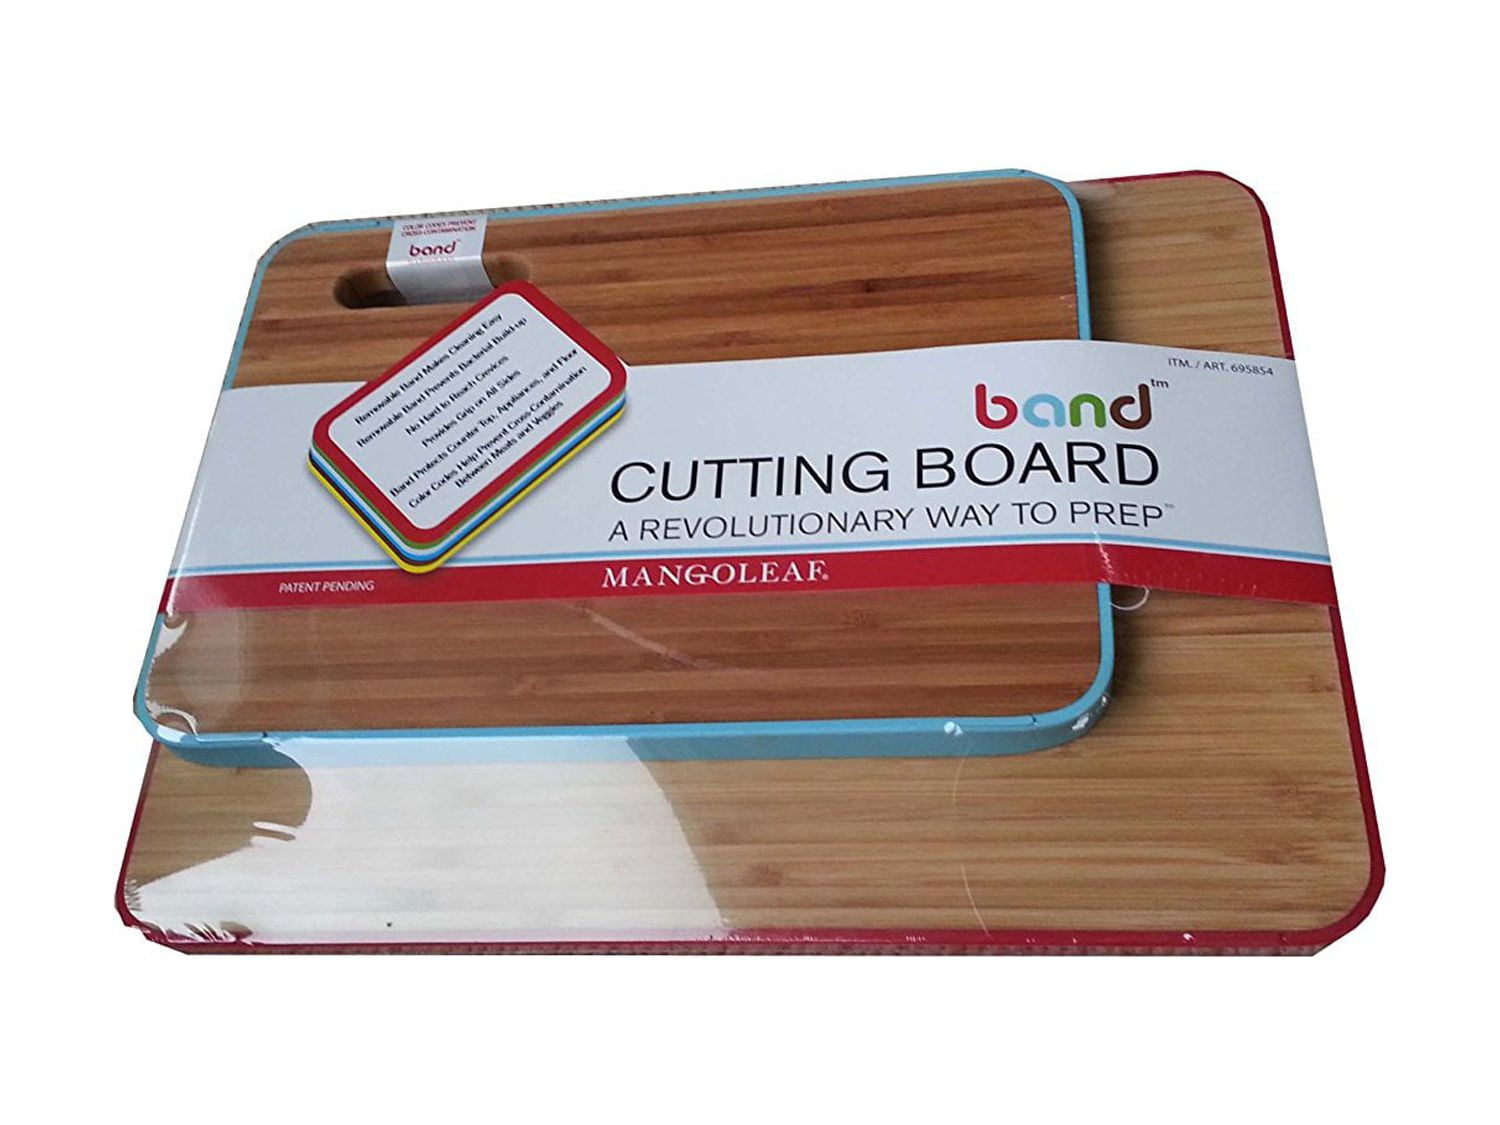 The Truth About Plastic Cutting Boards - Hardwood Artistry